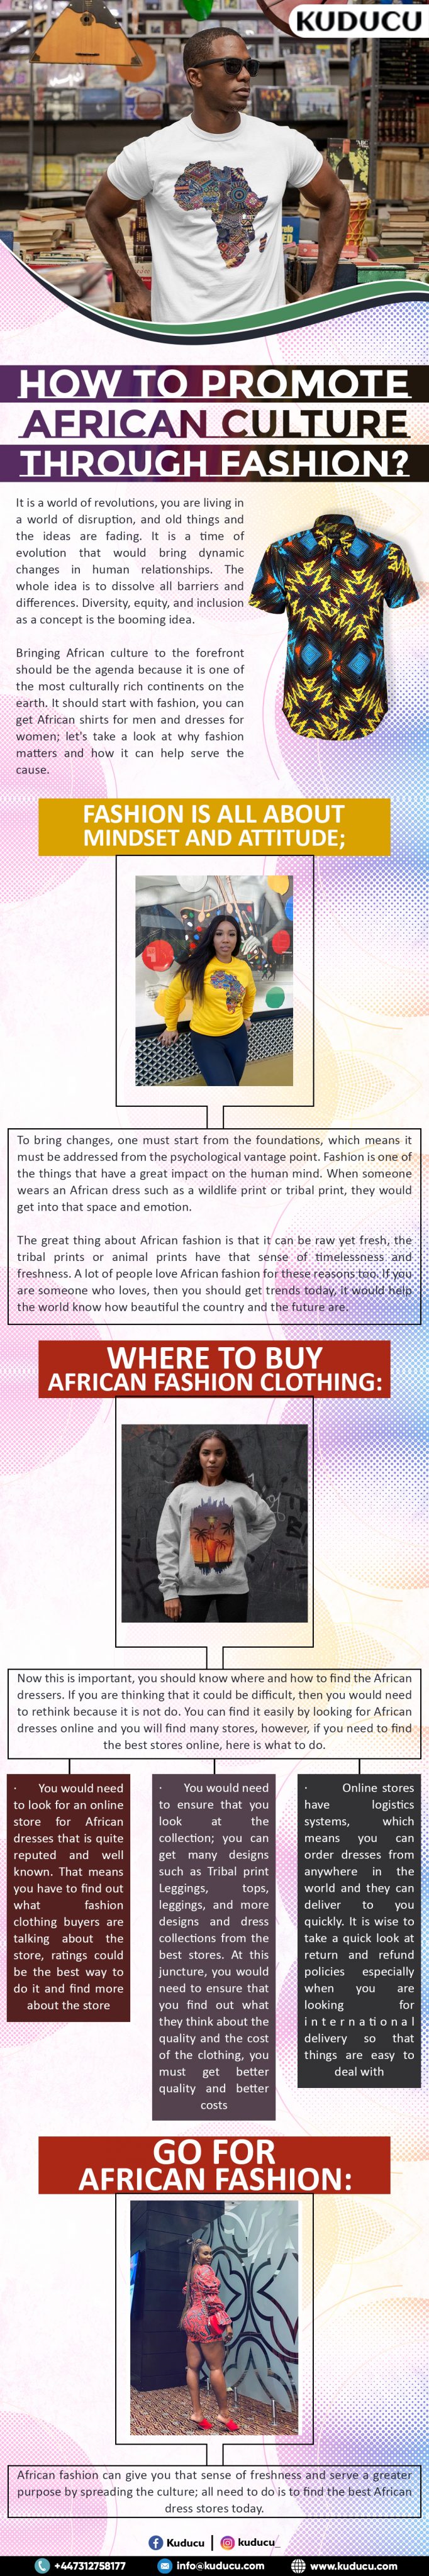 How To Promote African Culture Through Fashion